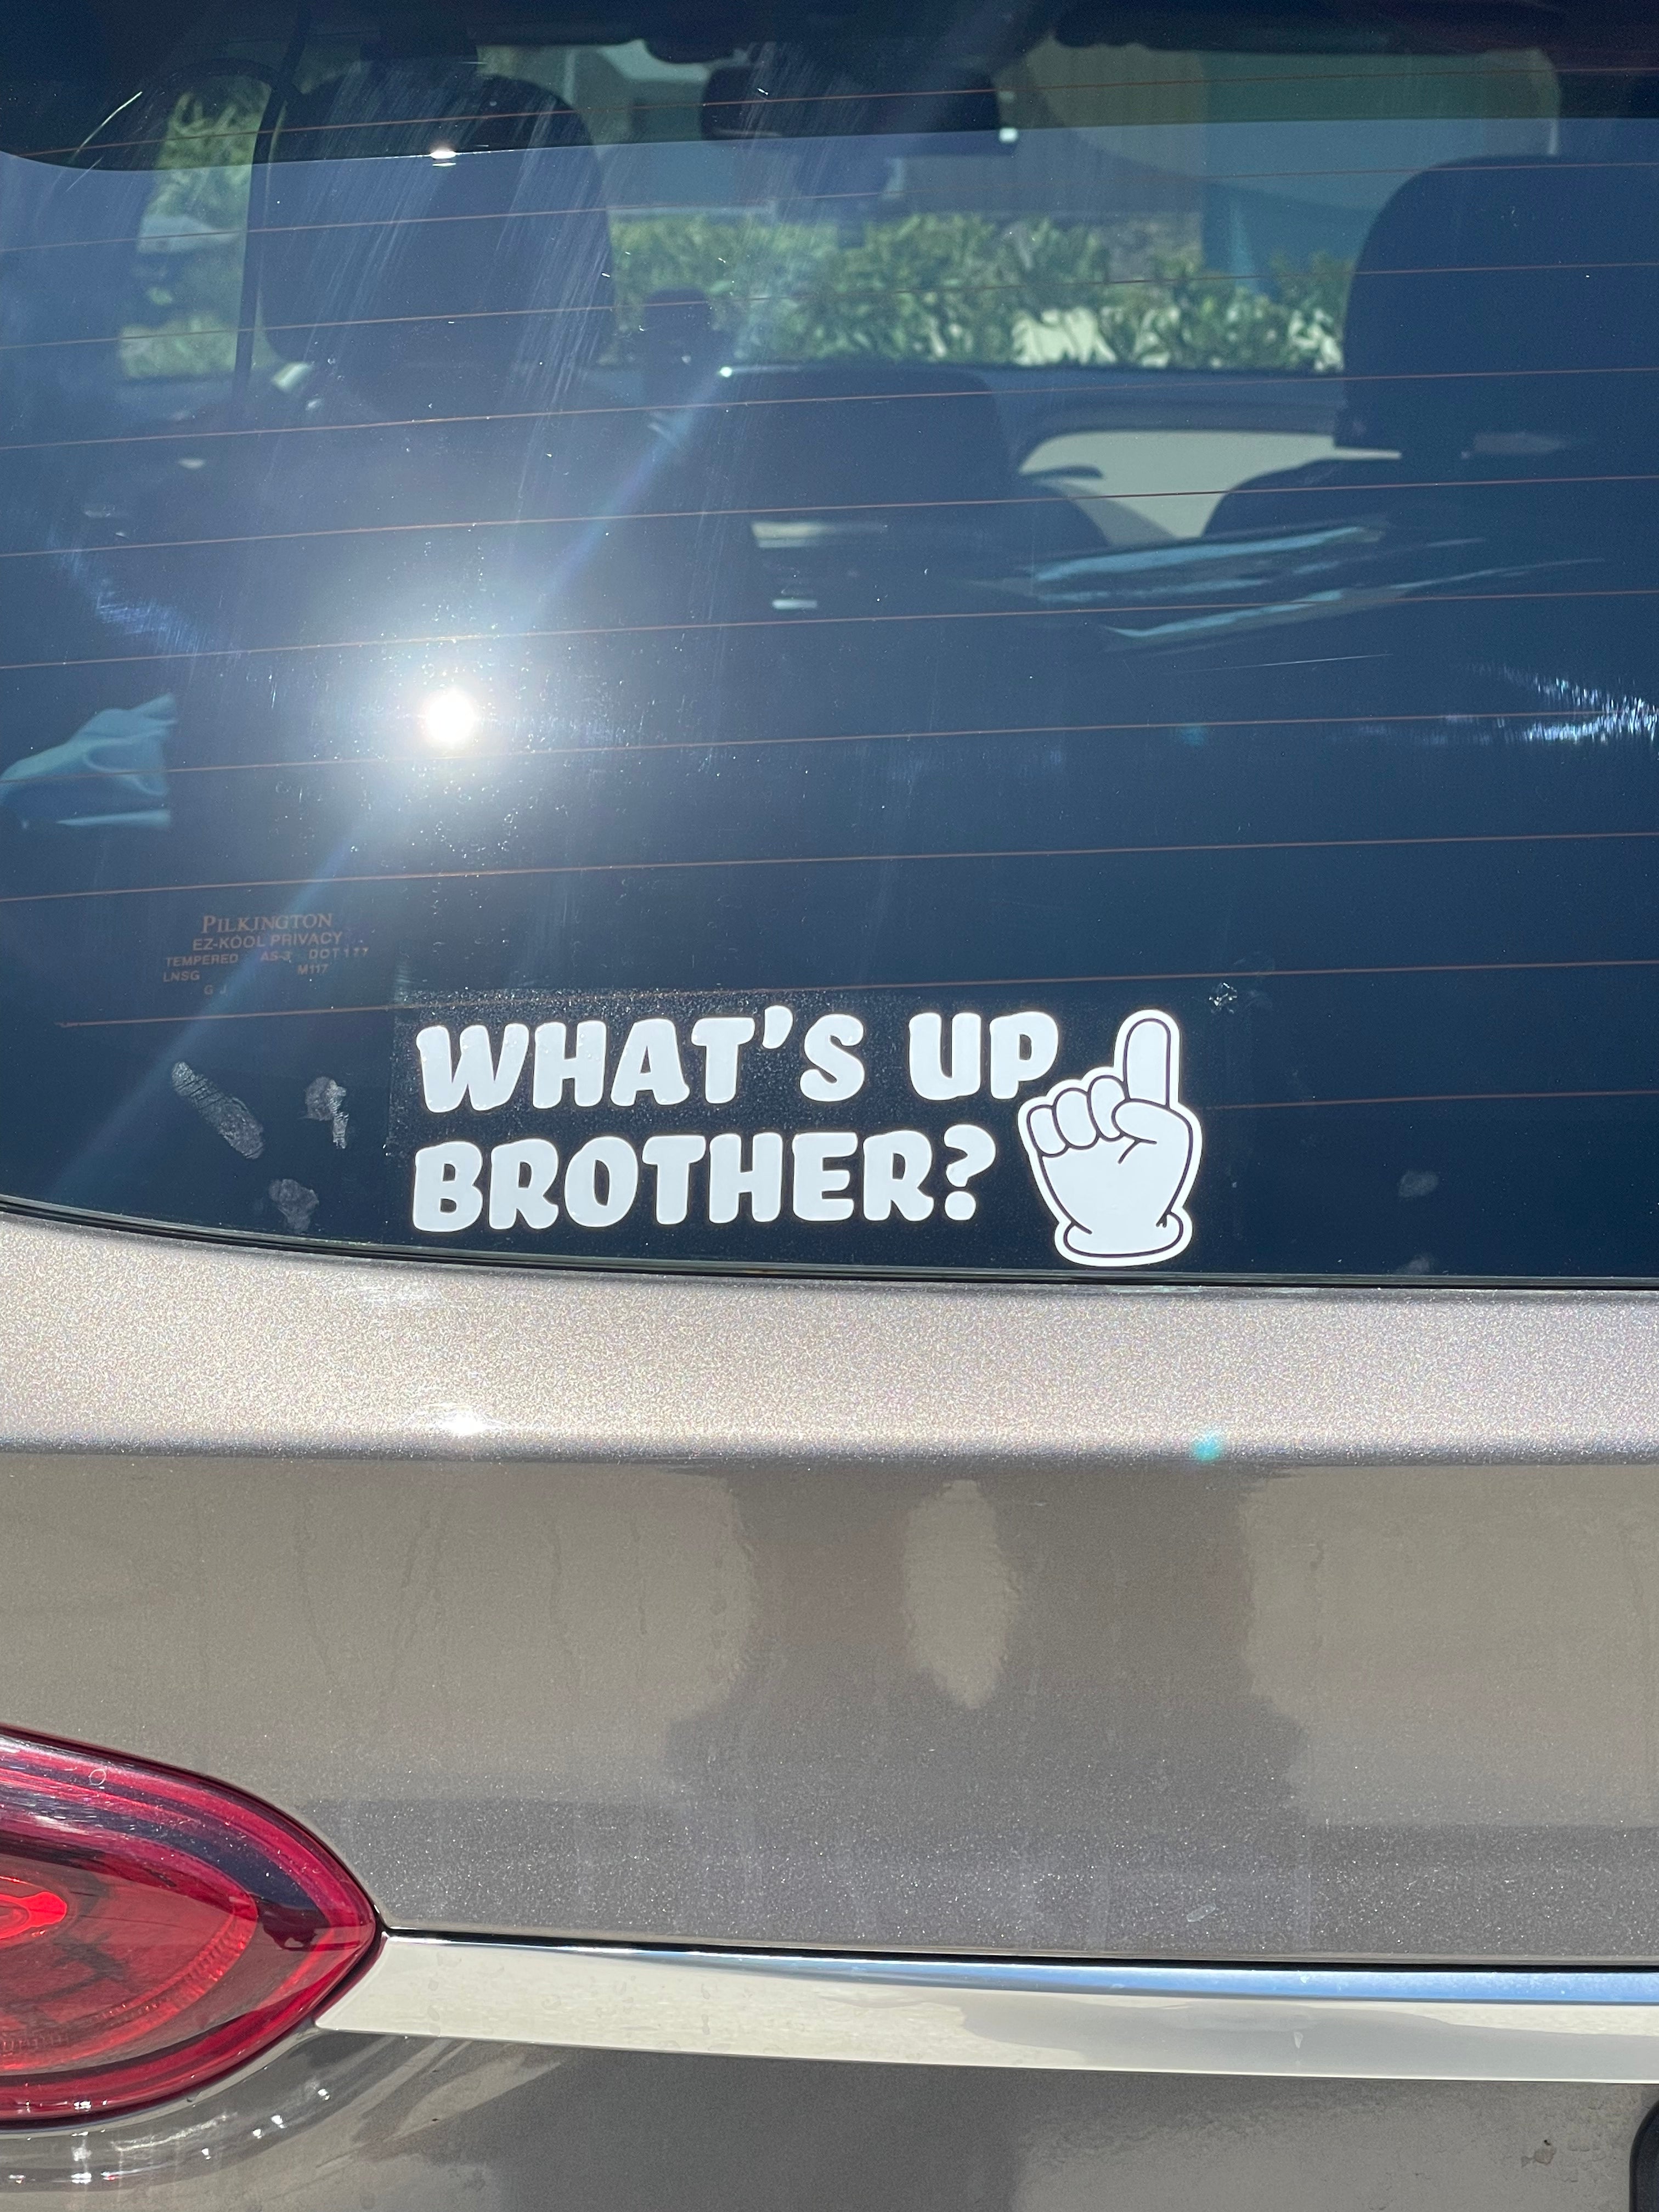 What's Up Brother? vinyl decal. Get this viral Sketch phrase decal for you car, truck, or computer - 0